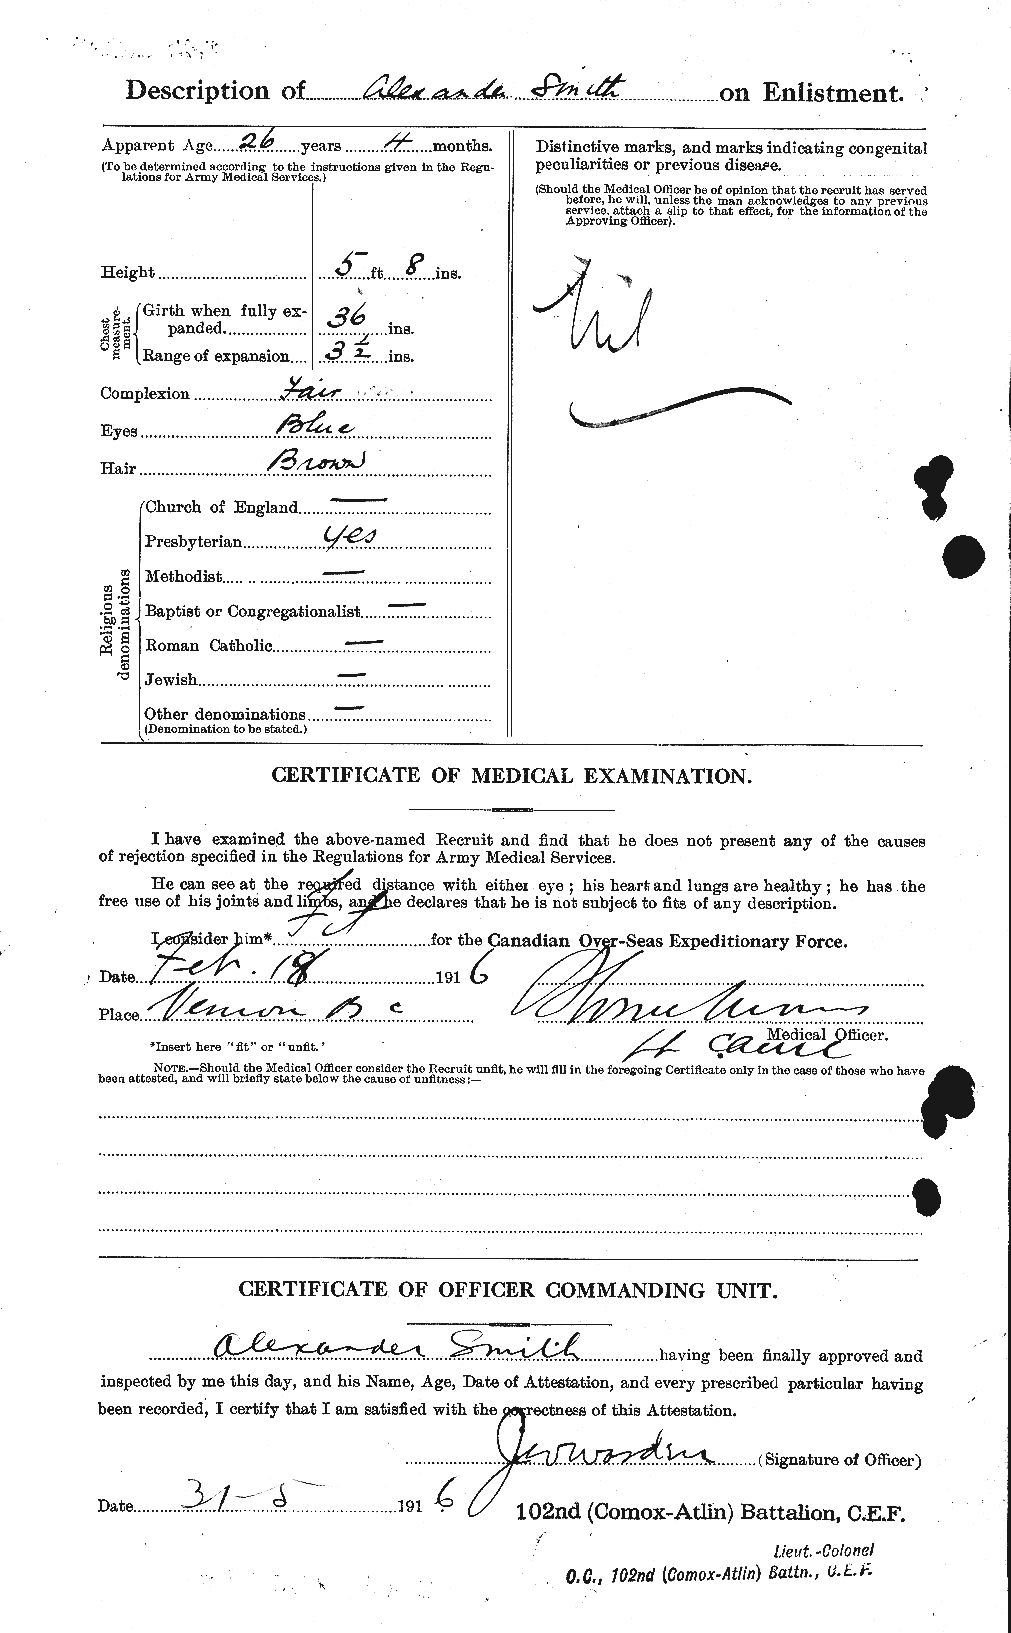 Personnel Records of the First World War - CEF 098443b